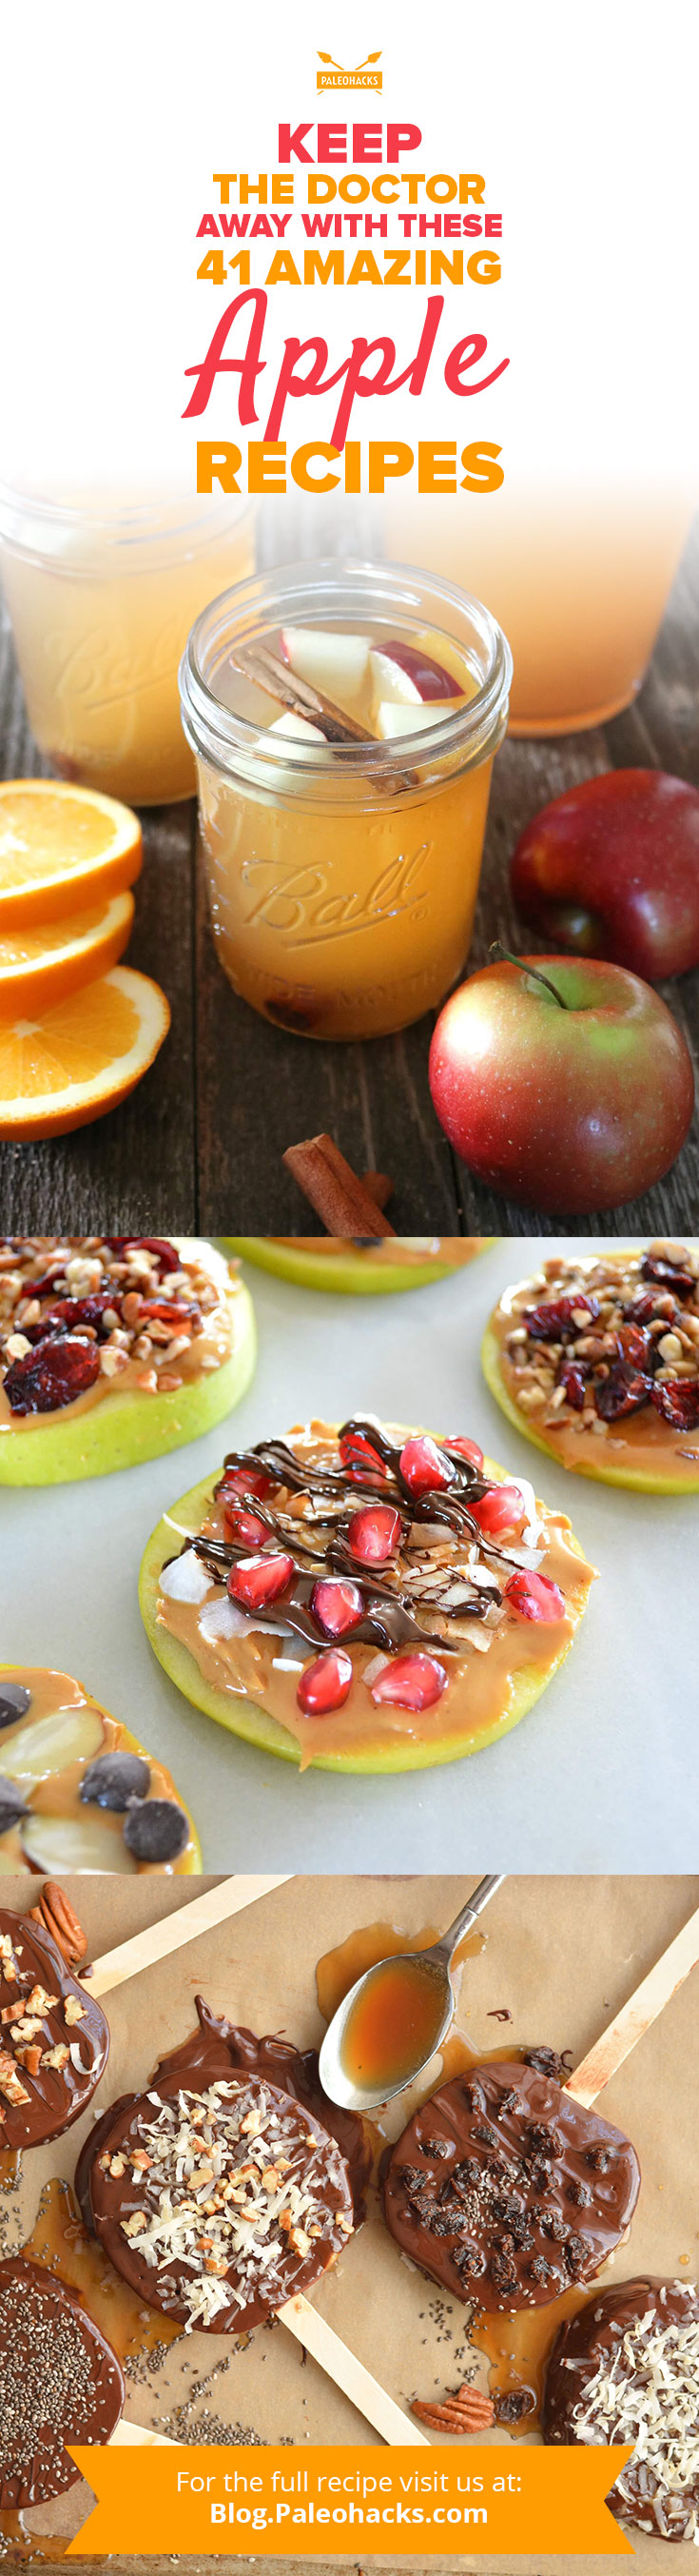 An apple a day keeps the doctor away, and these delicious apple recipes make it easy to get your daily serving in!